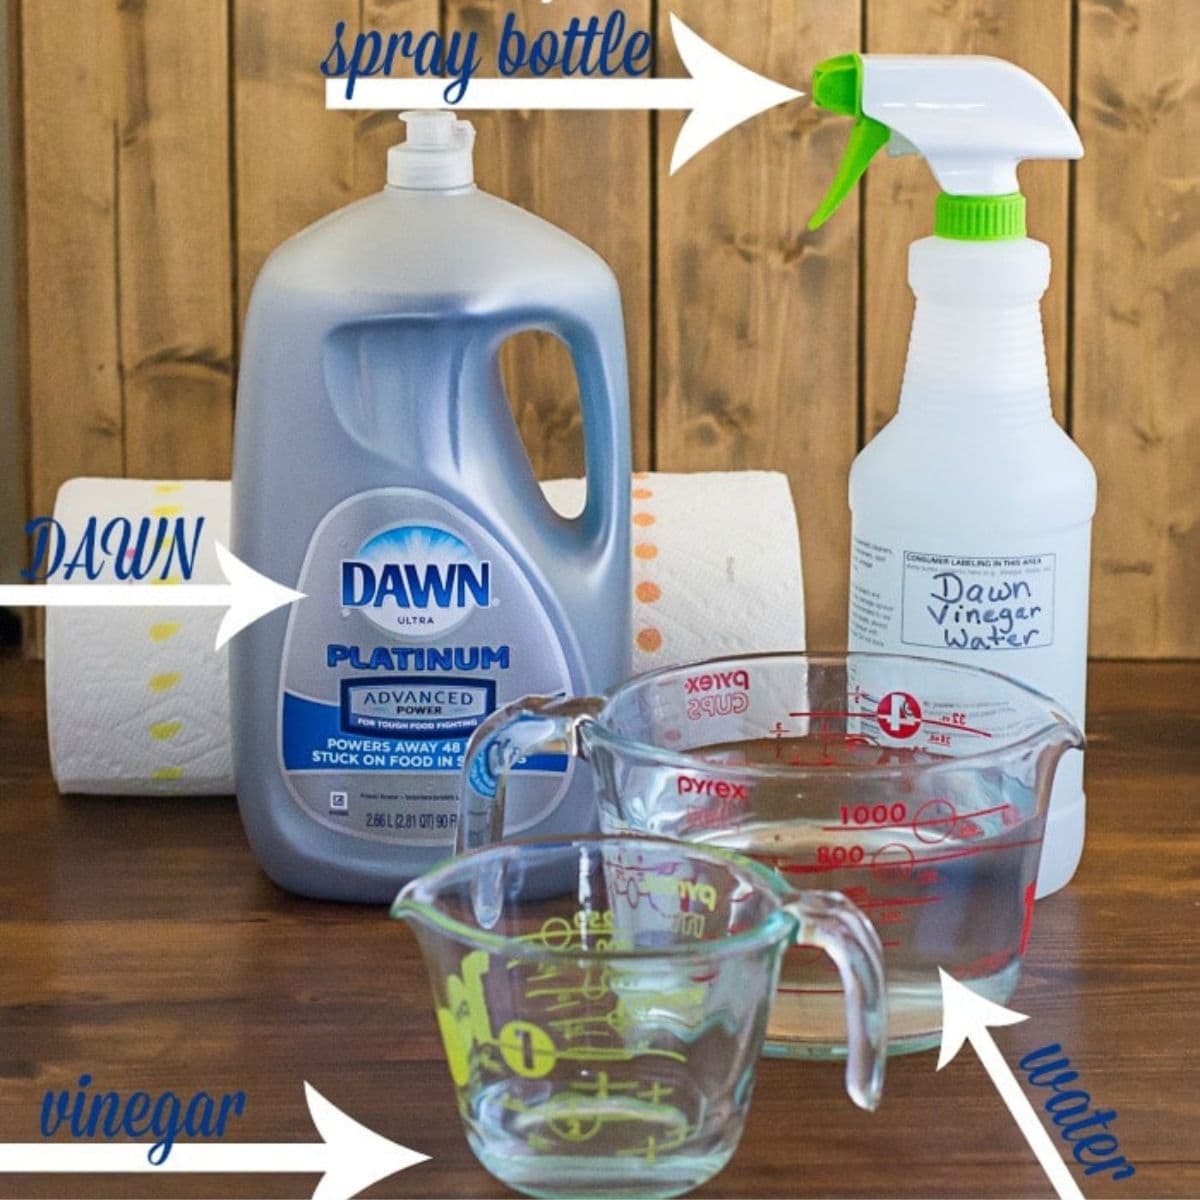 Supplies needed to make homemade diy all-purpose cleaning spray.